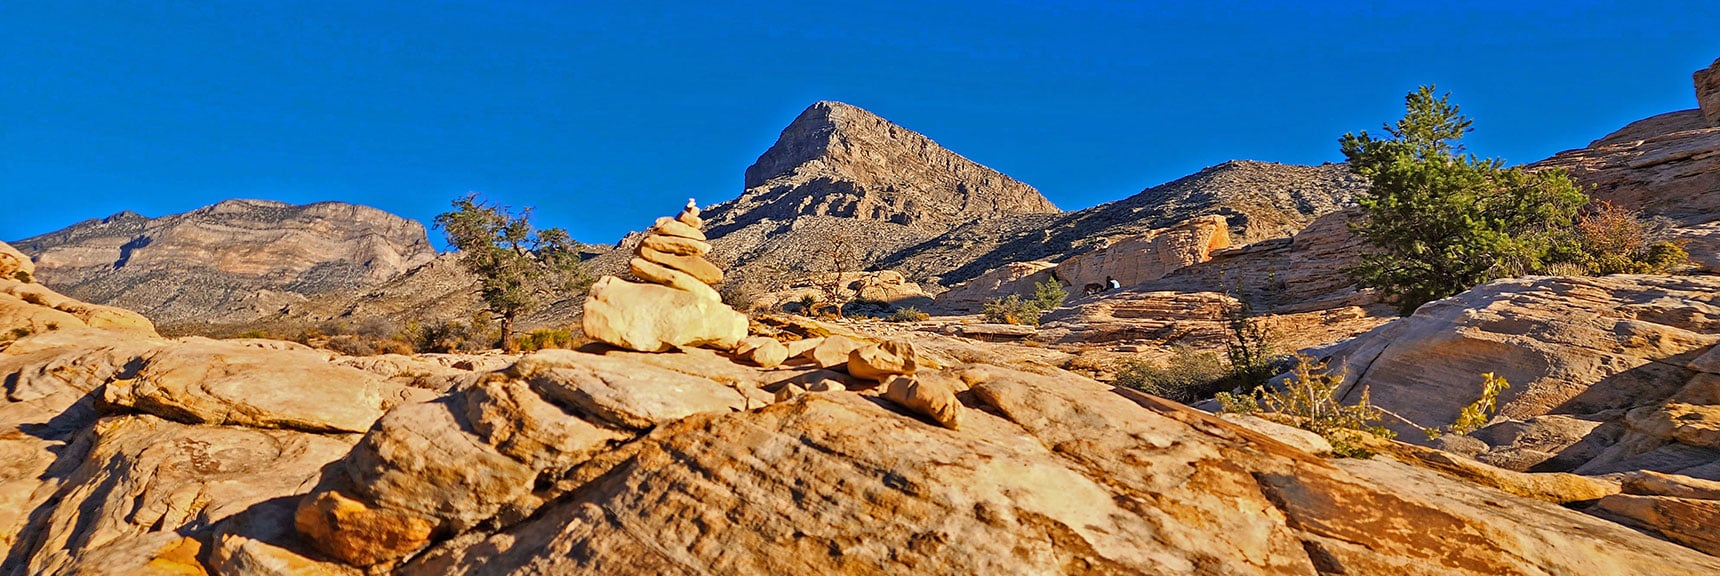 Turtlehead Peak is Often on the Horizon. More Bonsai Trees! | Calico Tanks | Red Rock Canyon National Conservation Area, Nevada